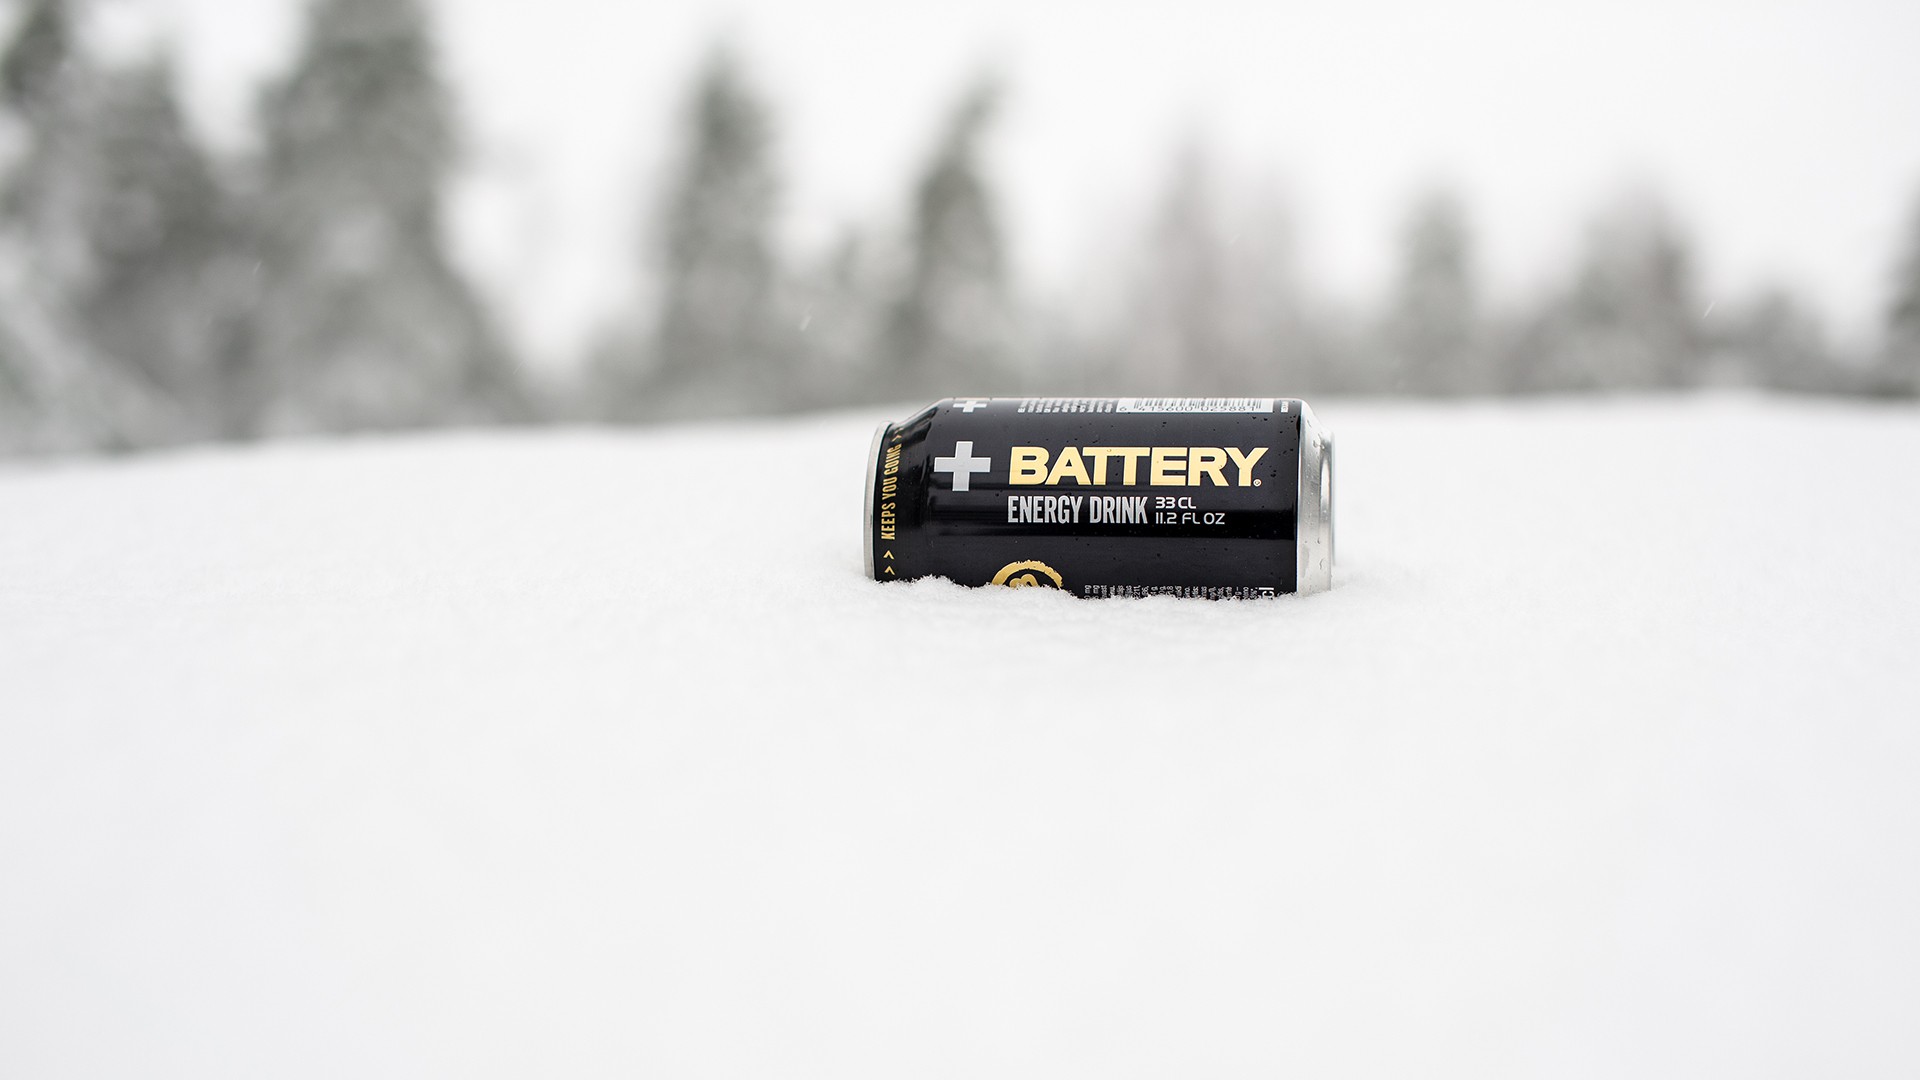 General 1920x1080 battery can snow energy drinks